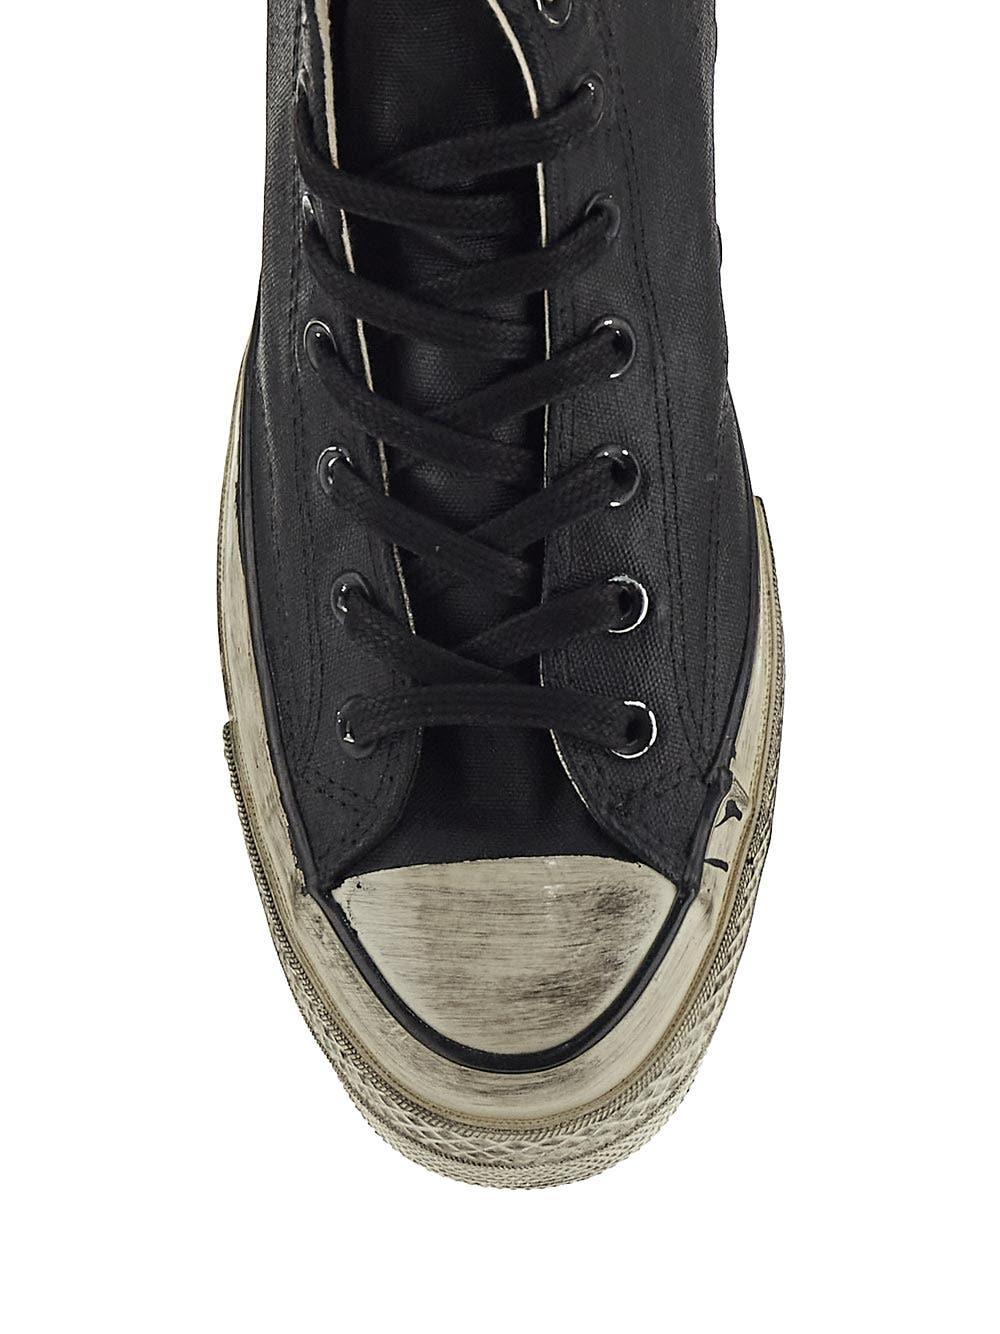 Converse Ct70 Lts High Sneakers in Black | Lyst